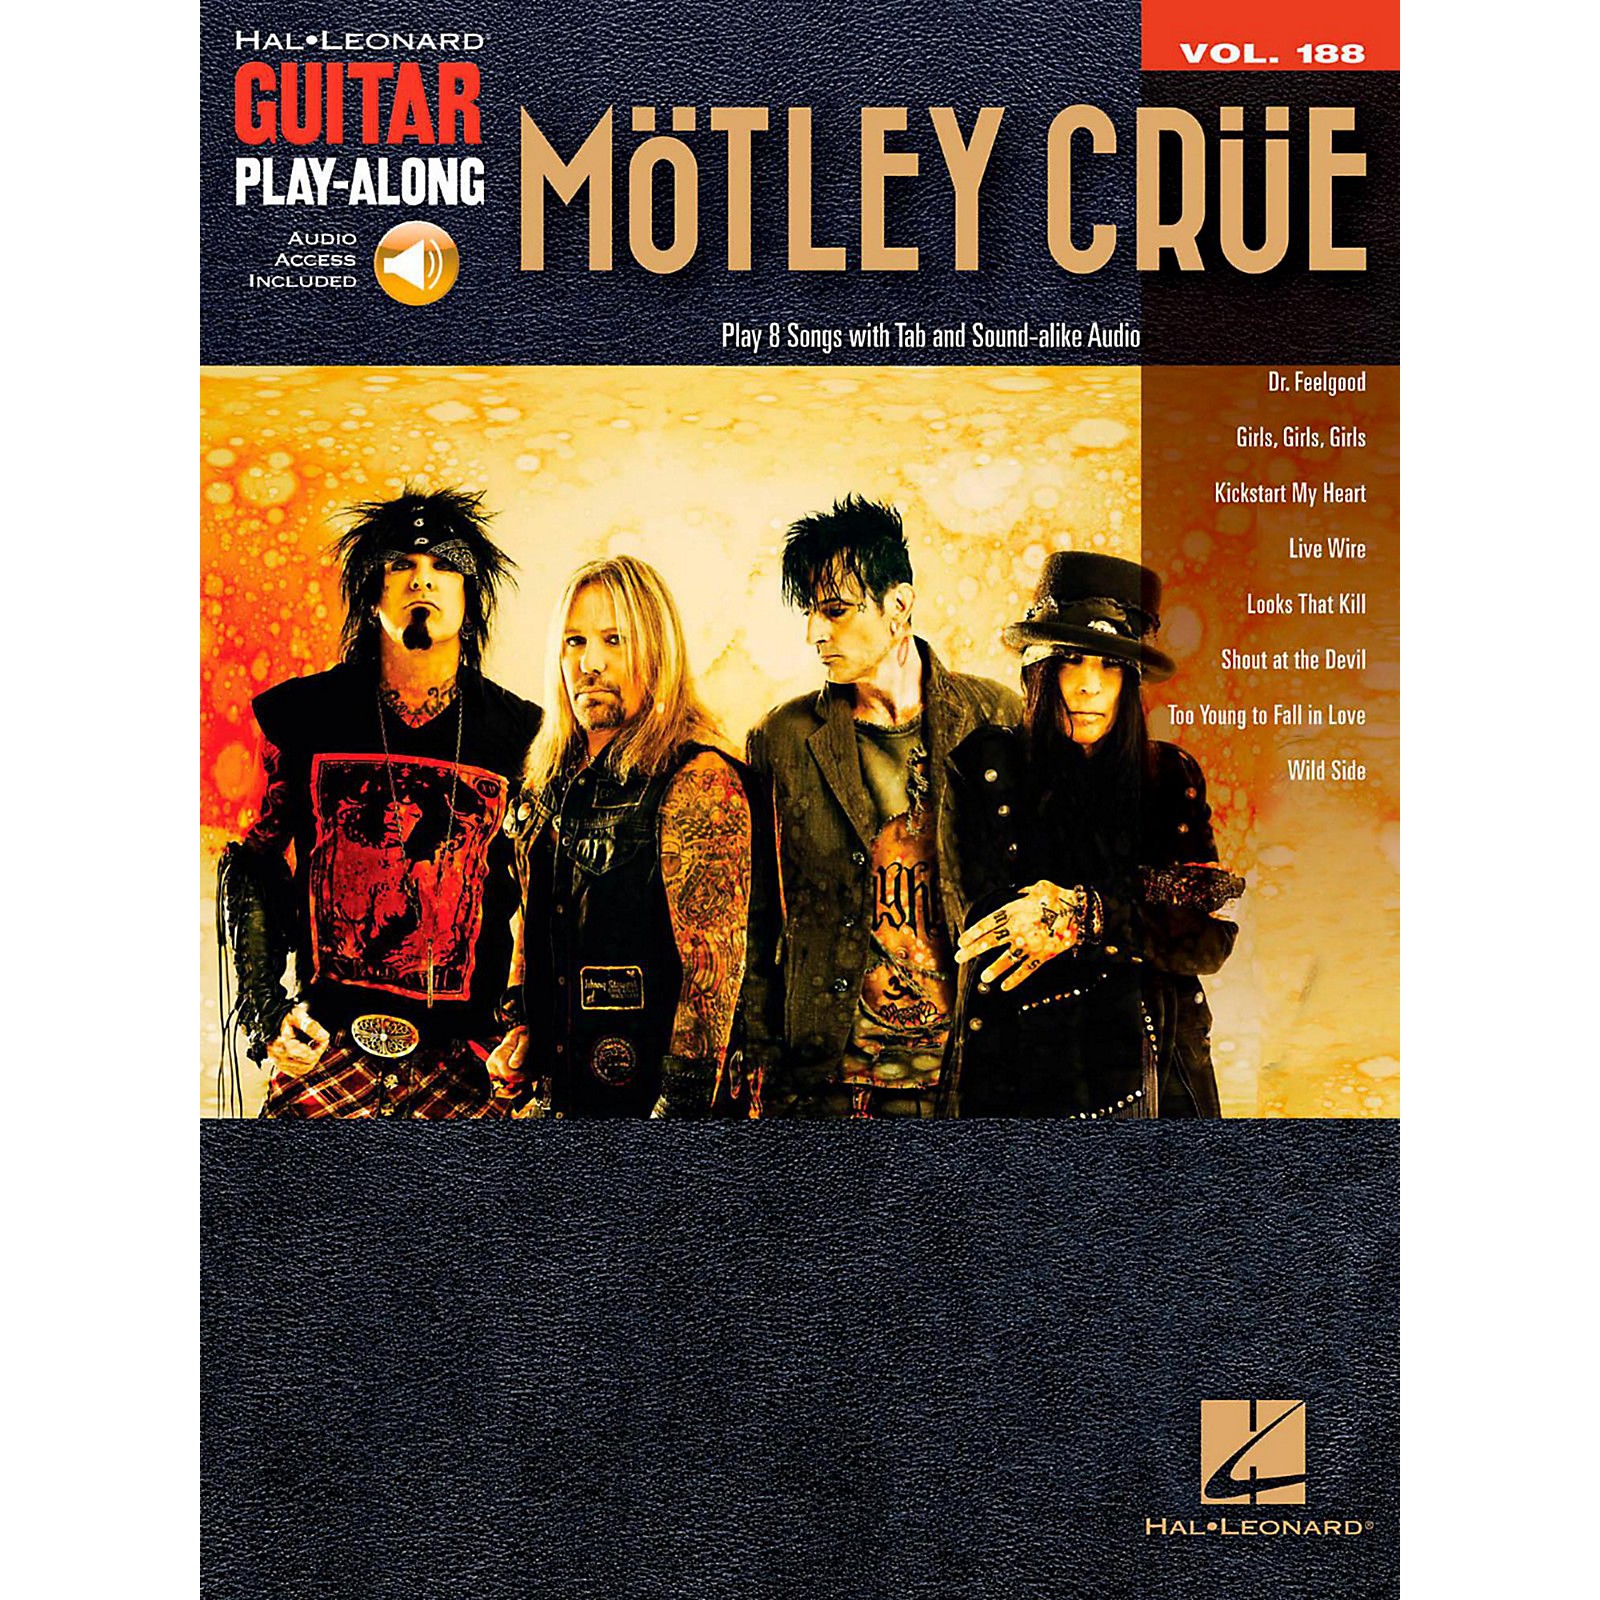 Live Wire - Live - song and lyrics by Mötley Crüe